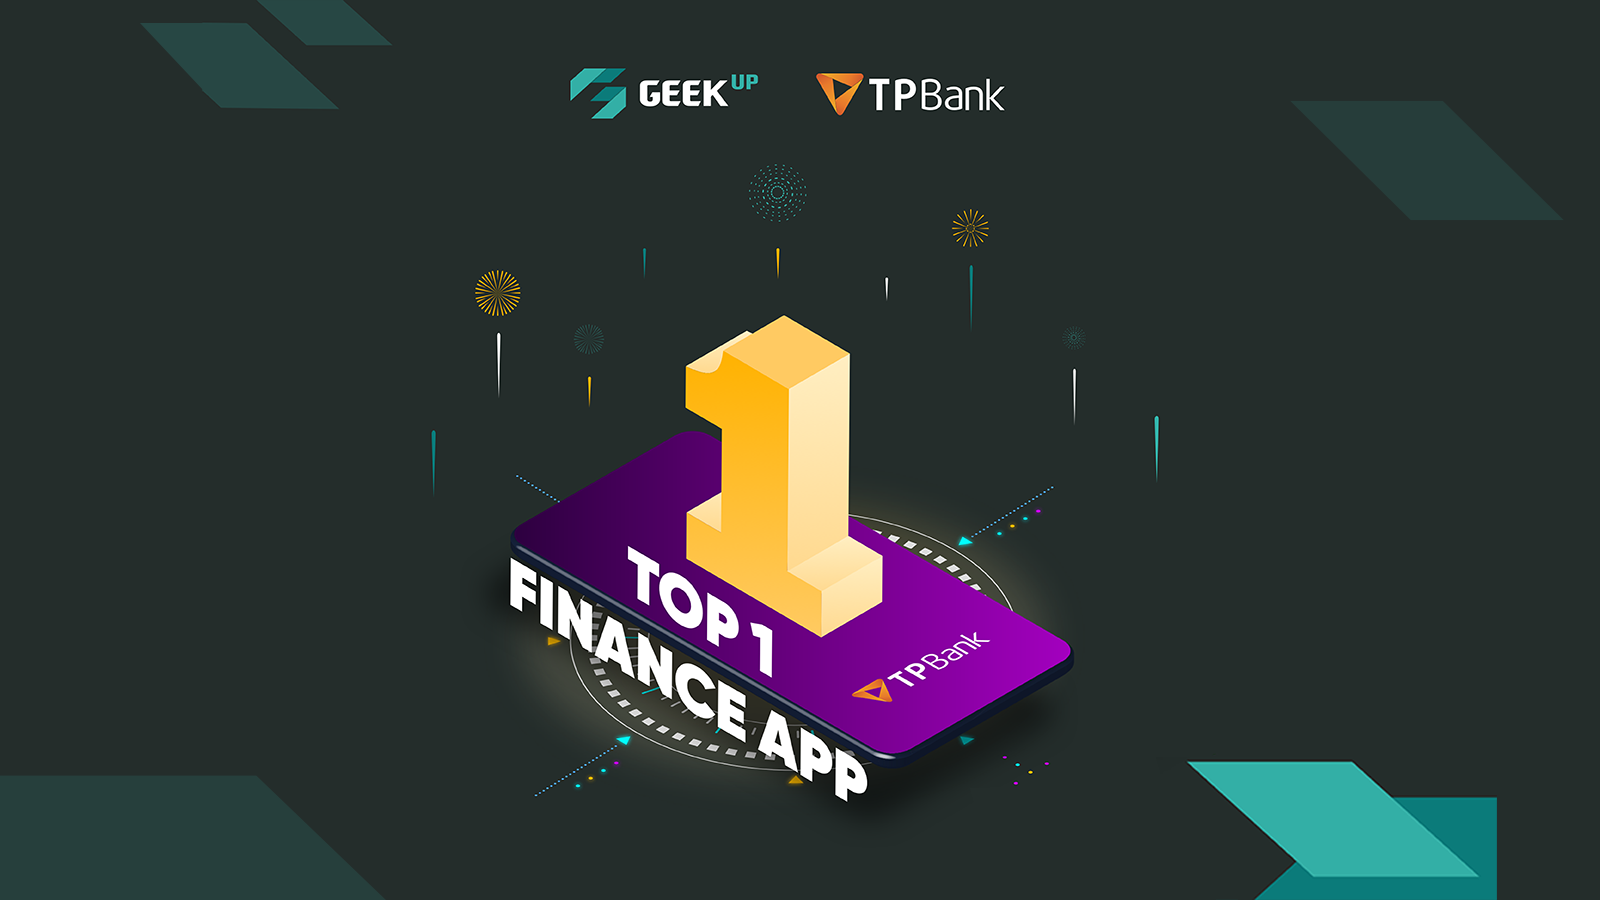 Top 1 of the most downloaded Banking and Financial applications in Vietnam on both the App Store and Google Play in October 2020